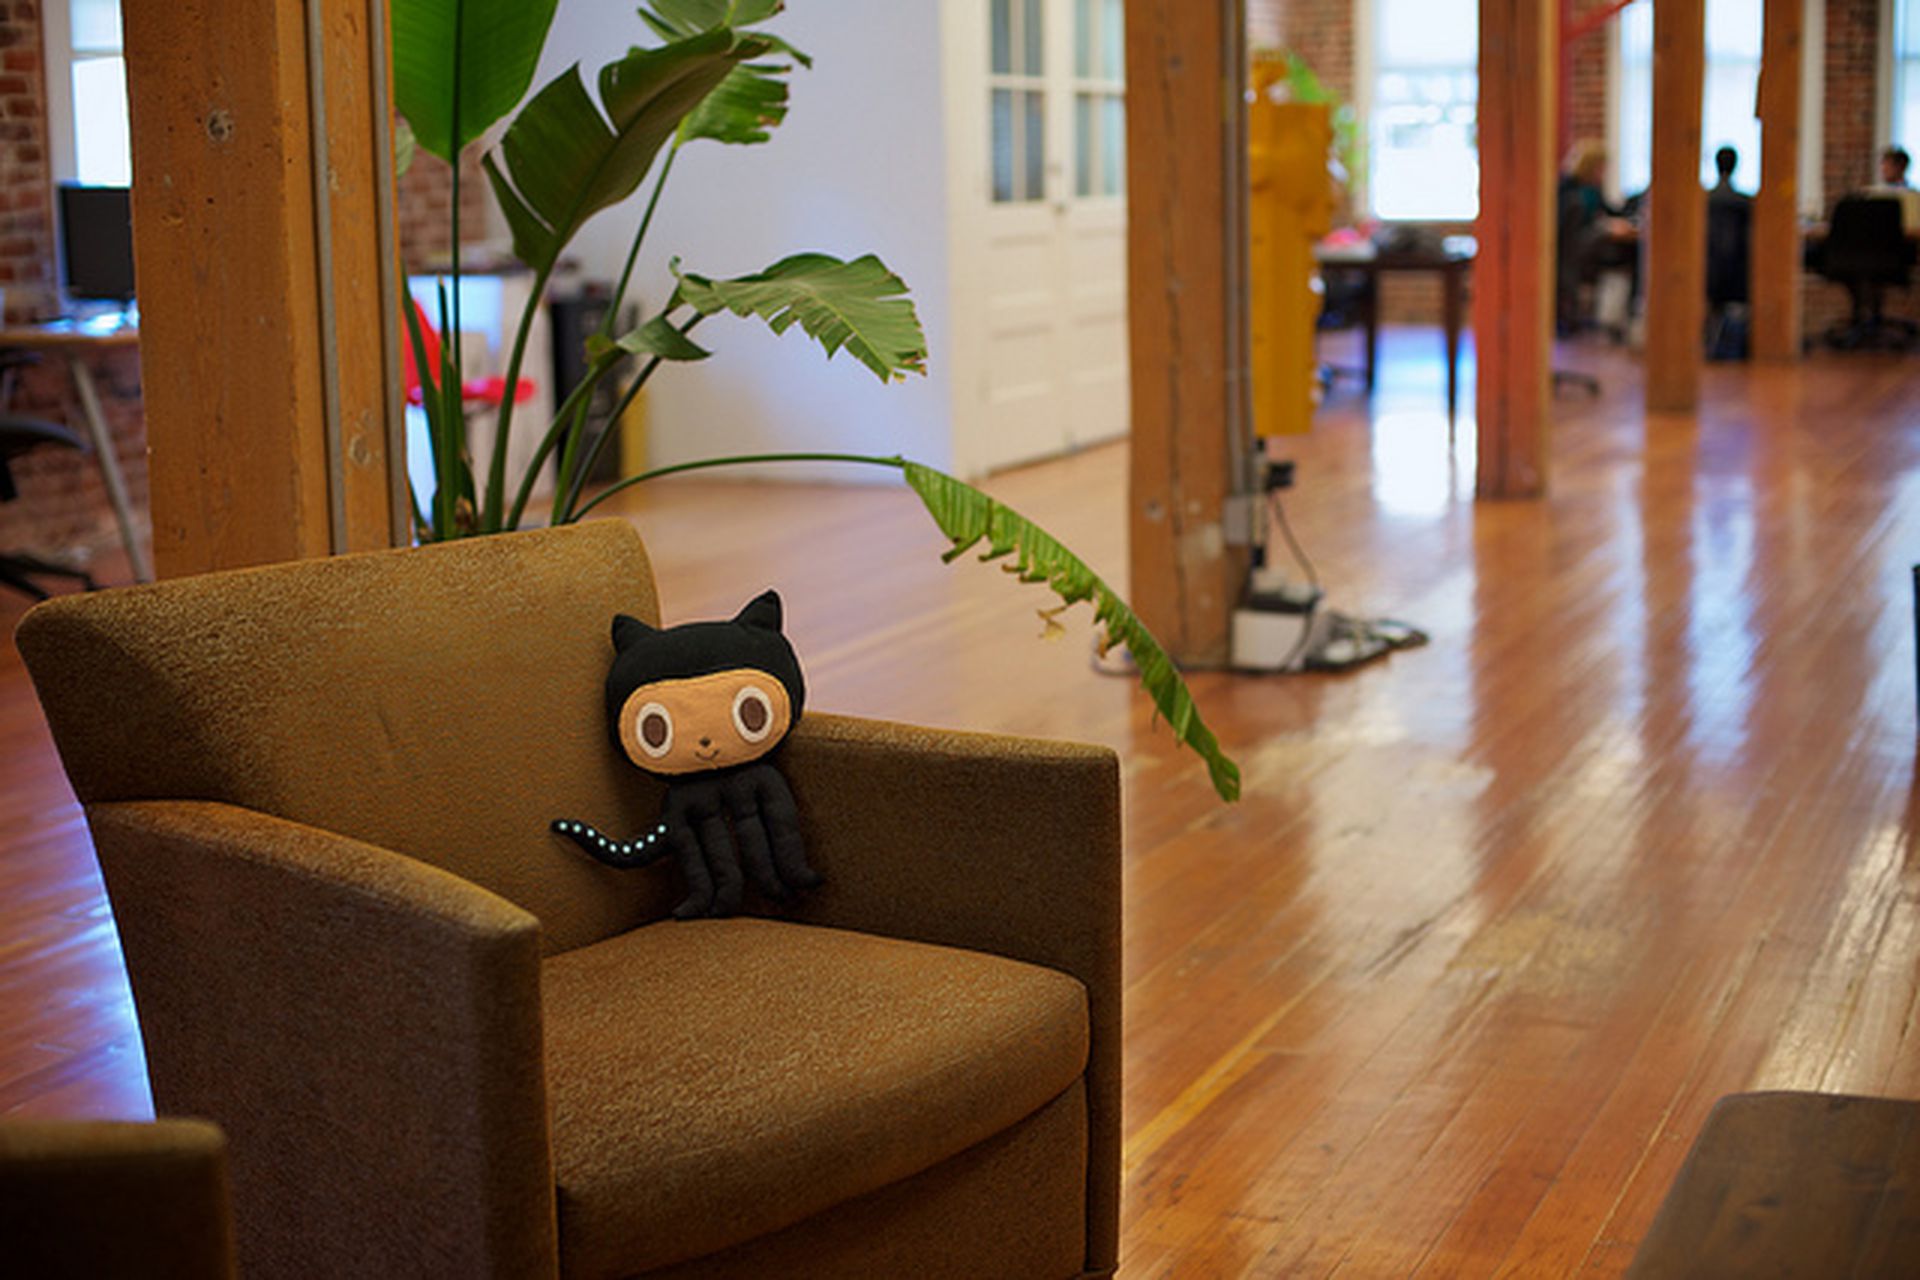 Github Apologizes For Vagueness Reveals New Details About Sexism Investigation The Verge